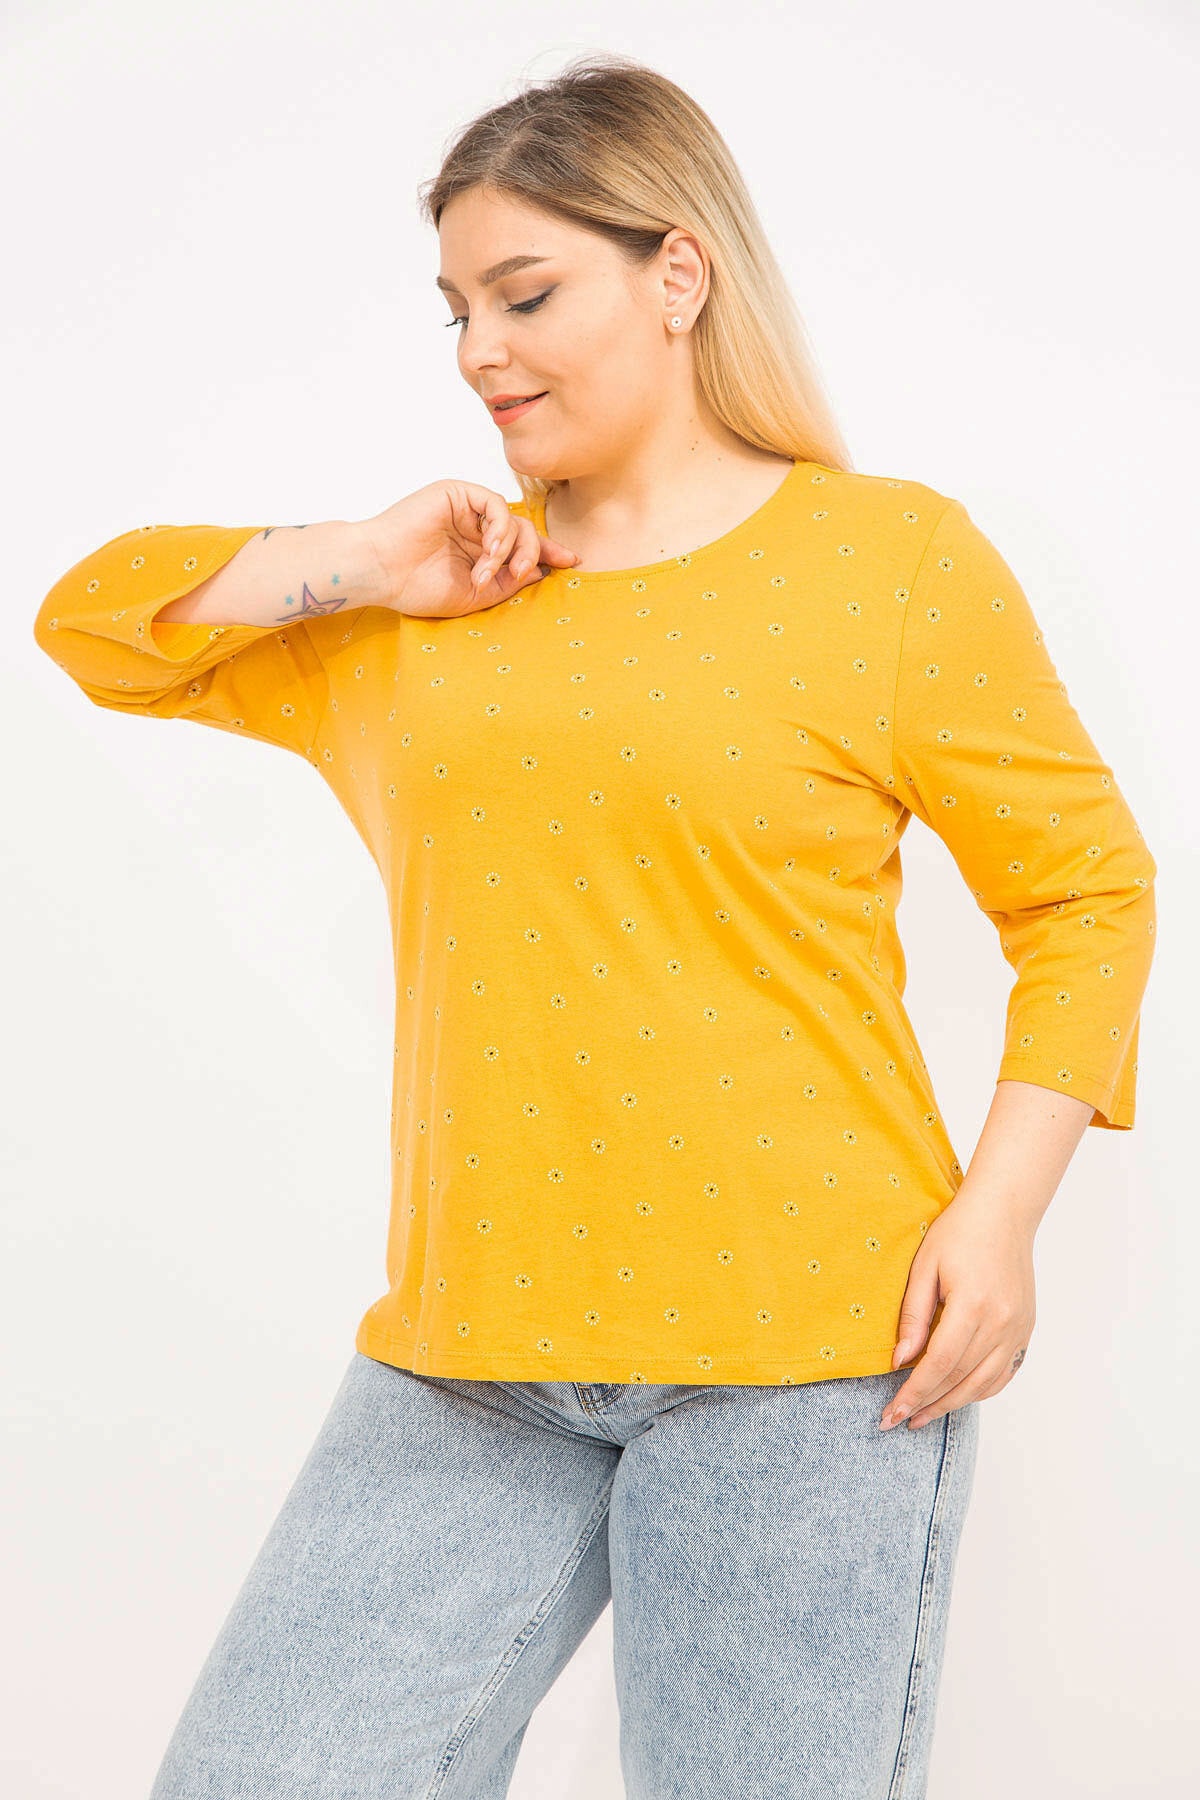 Levně Şans Women's Yellow Plus Size Cotton Fabric Blouse with Ornamental Buttons and Capri Sleeves at the Back